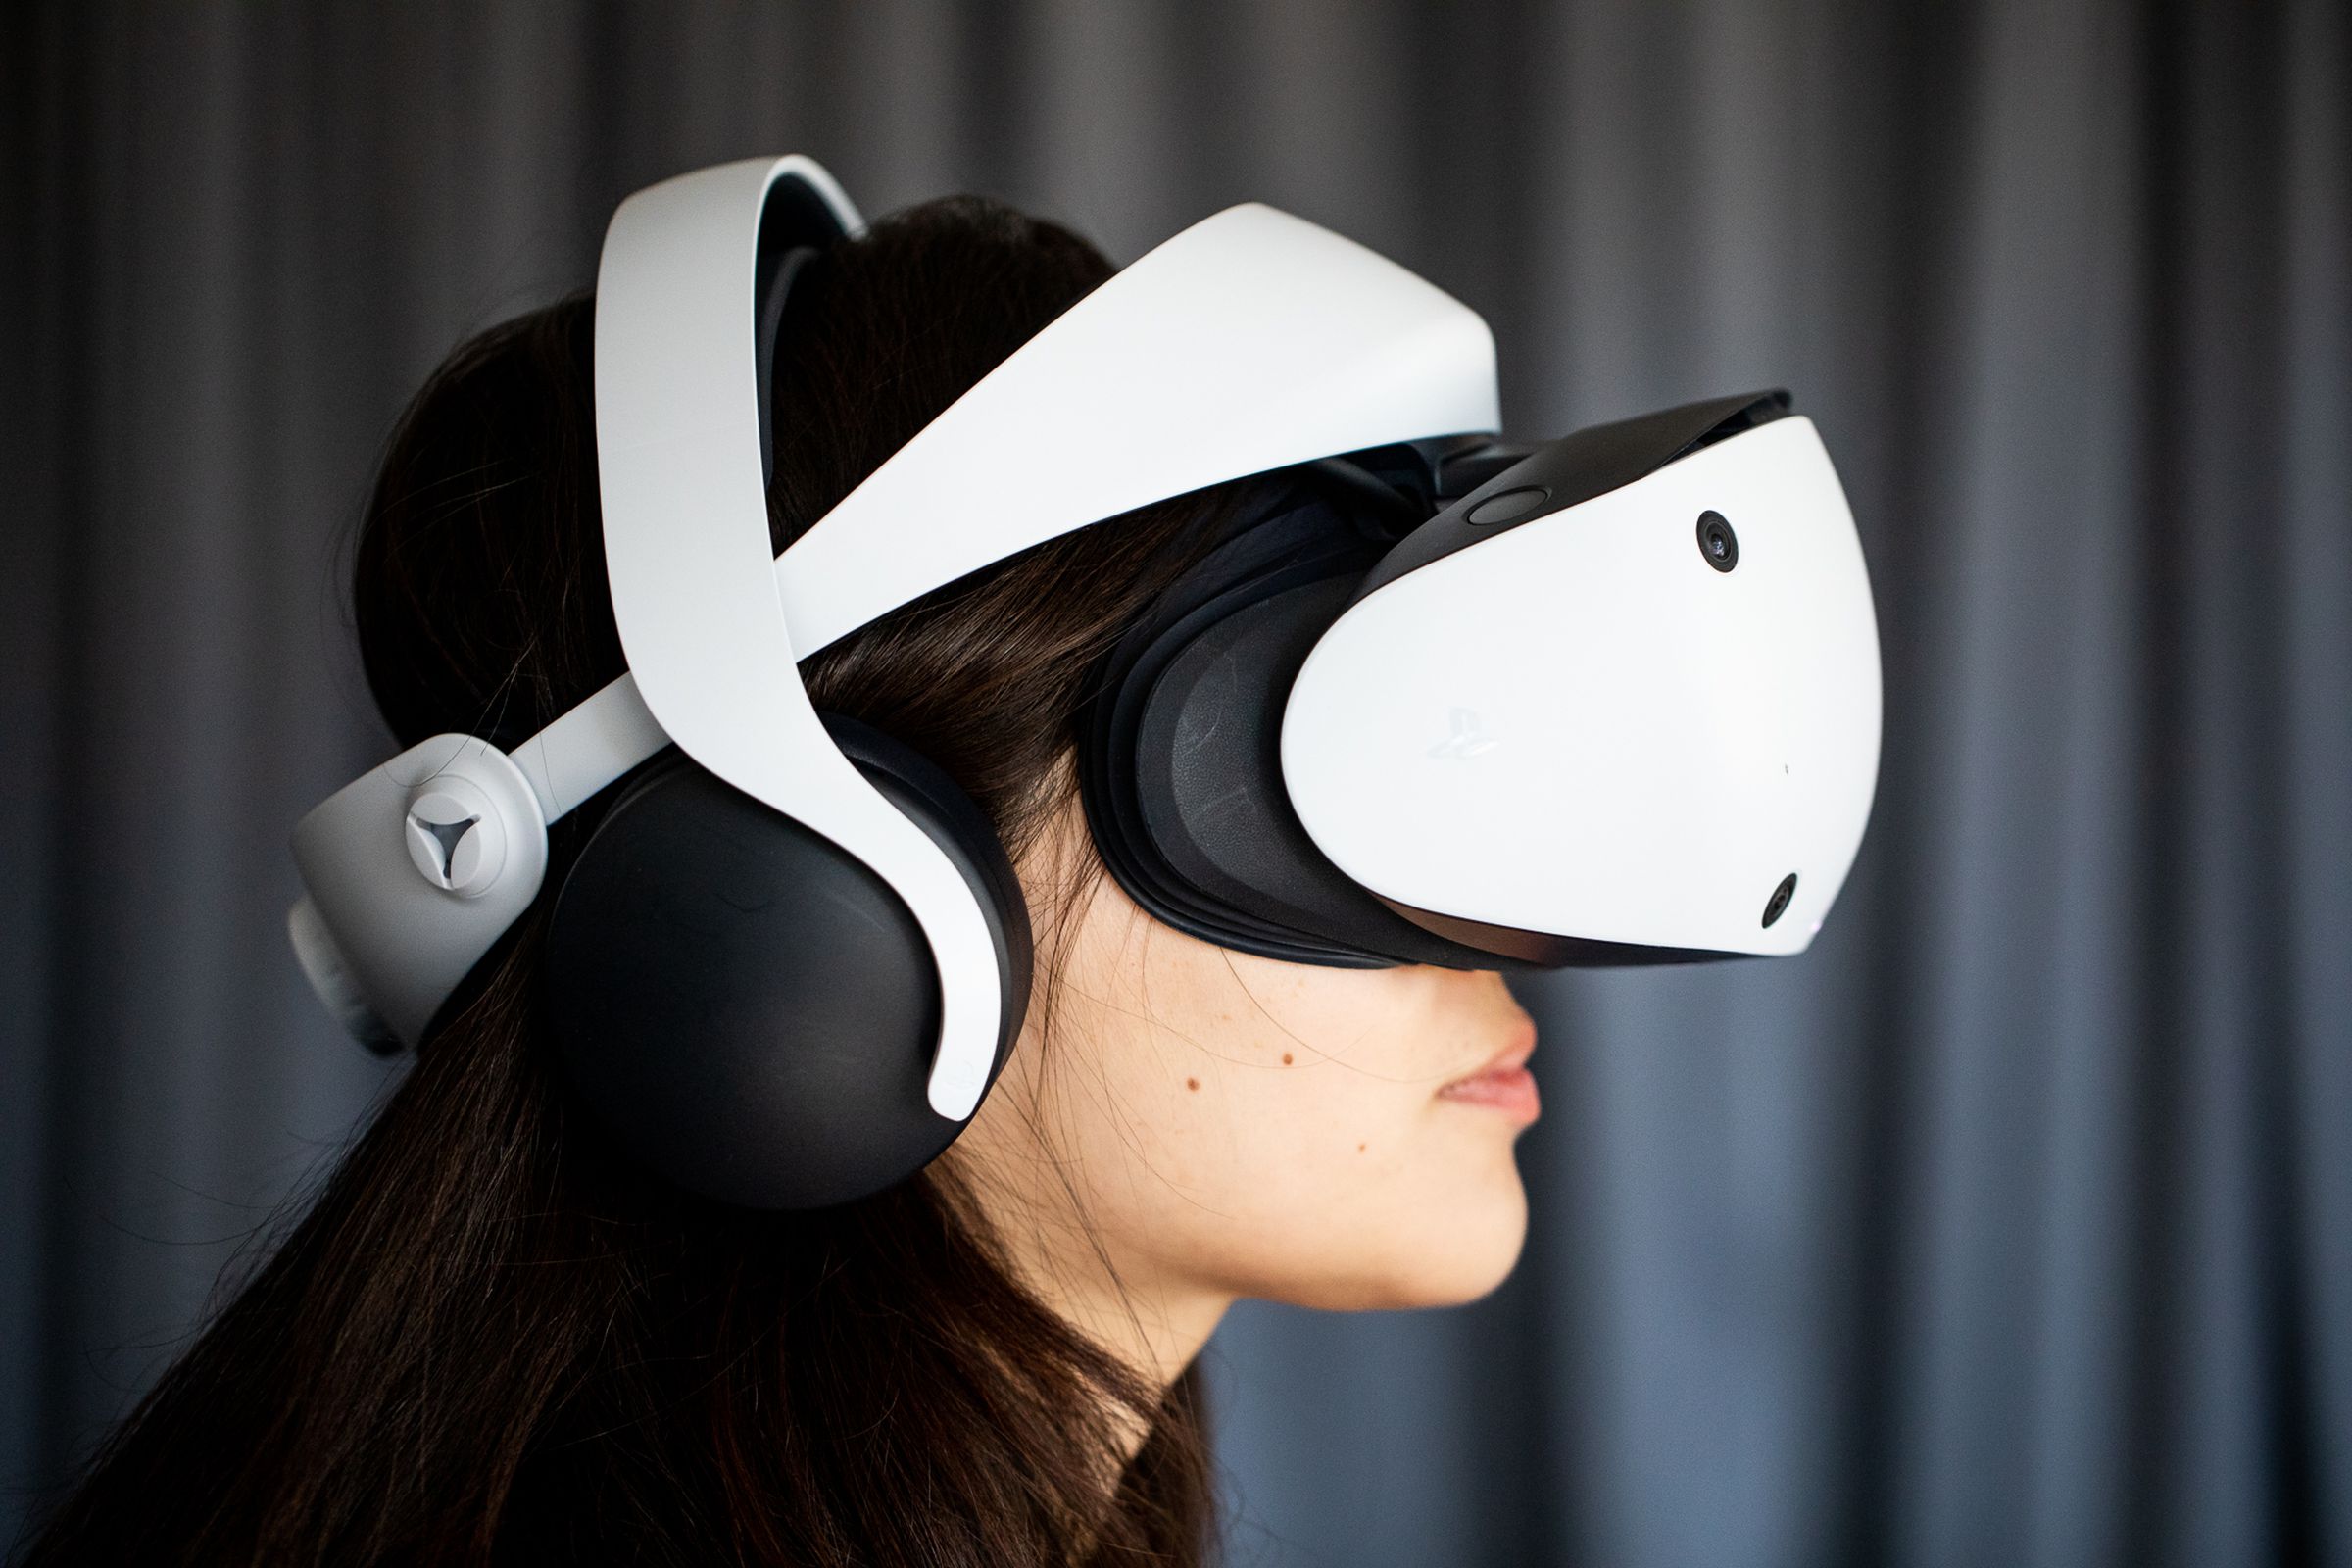 Verge reporter Victoria Song wearing the PlayStation VR2 virtual reality headset.